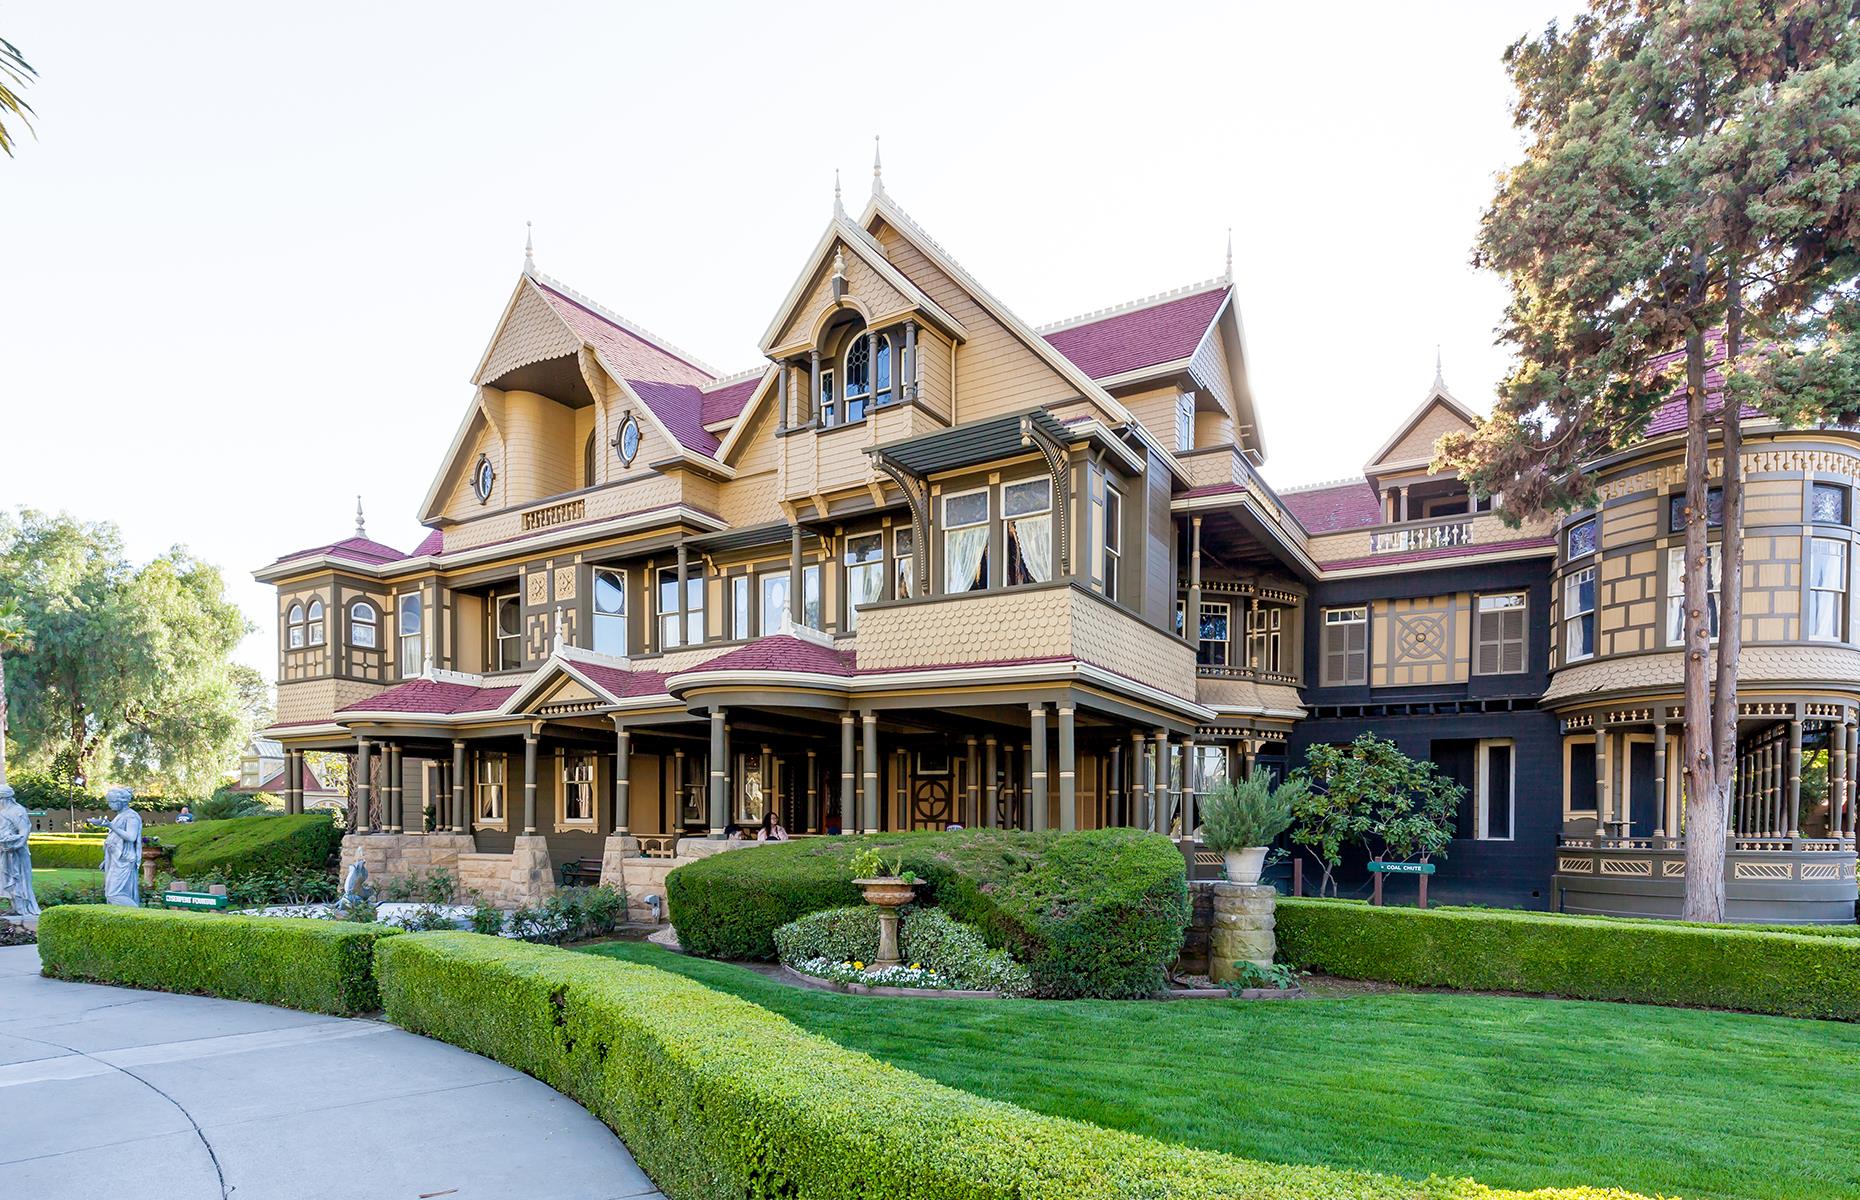 <p>Even without stories of ghosts and ghouls, the <a href="https://www.winchestermysteryhouse.com/">Winchester Mystery House</a> is a wonder. It was the vision of widow Sarah Winchester, who first bought a humble two-story farmhouse in 1886. She eventually built the home out to a seven-story mansion complete with 160 rooms and the seemingly never-ending construction remains a mystery to this day. Some believe her bizarre building frenzy was the result of her being plagued by spirits and paranormal stories are explored on guided tours – there are typically special events for Halloween too.</p>